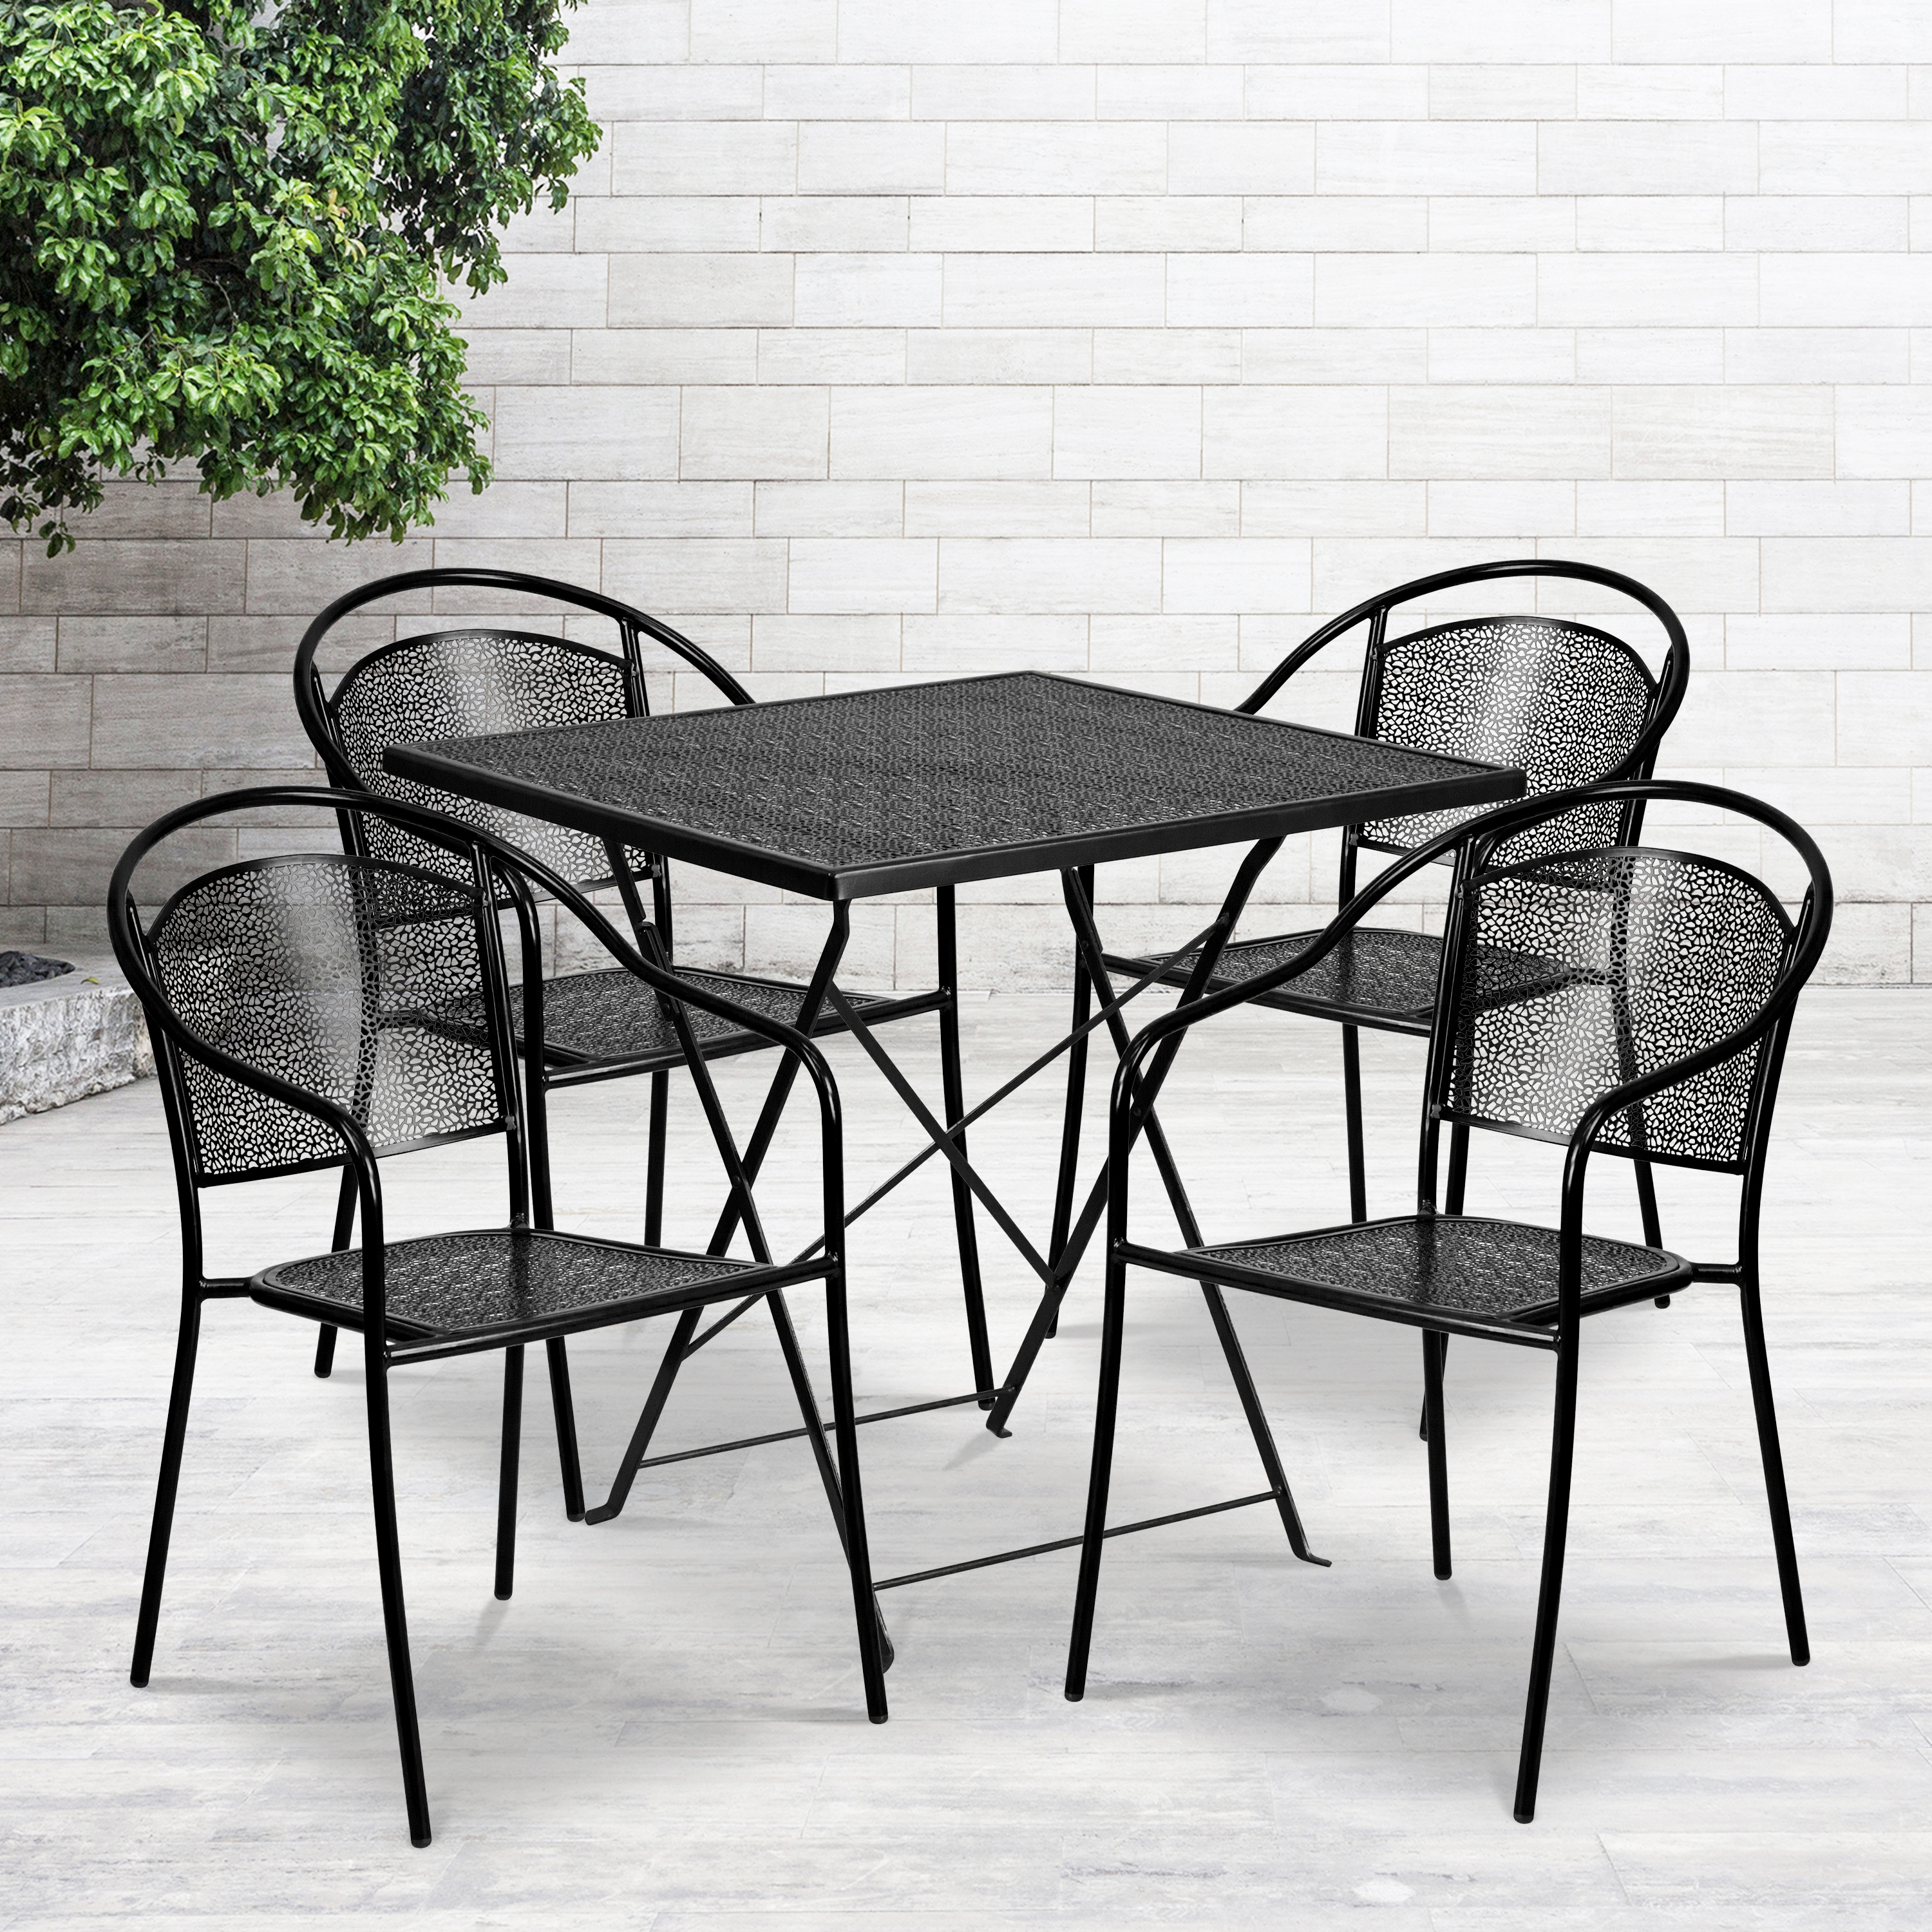 Flash Furniture Oia Commercial Grade 28" Square Black Indoor-Outdoor Steel Folding Patio Table Set with 4 Round Back Chairs - image 2 of 5